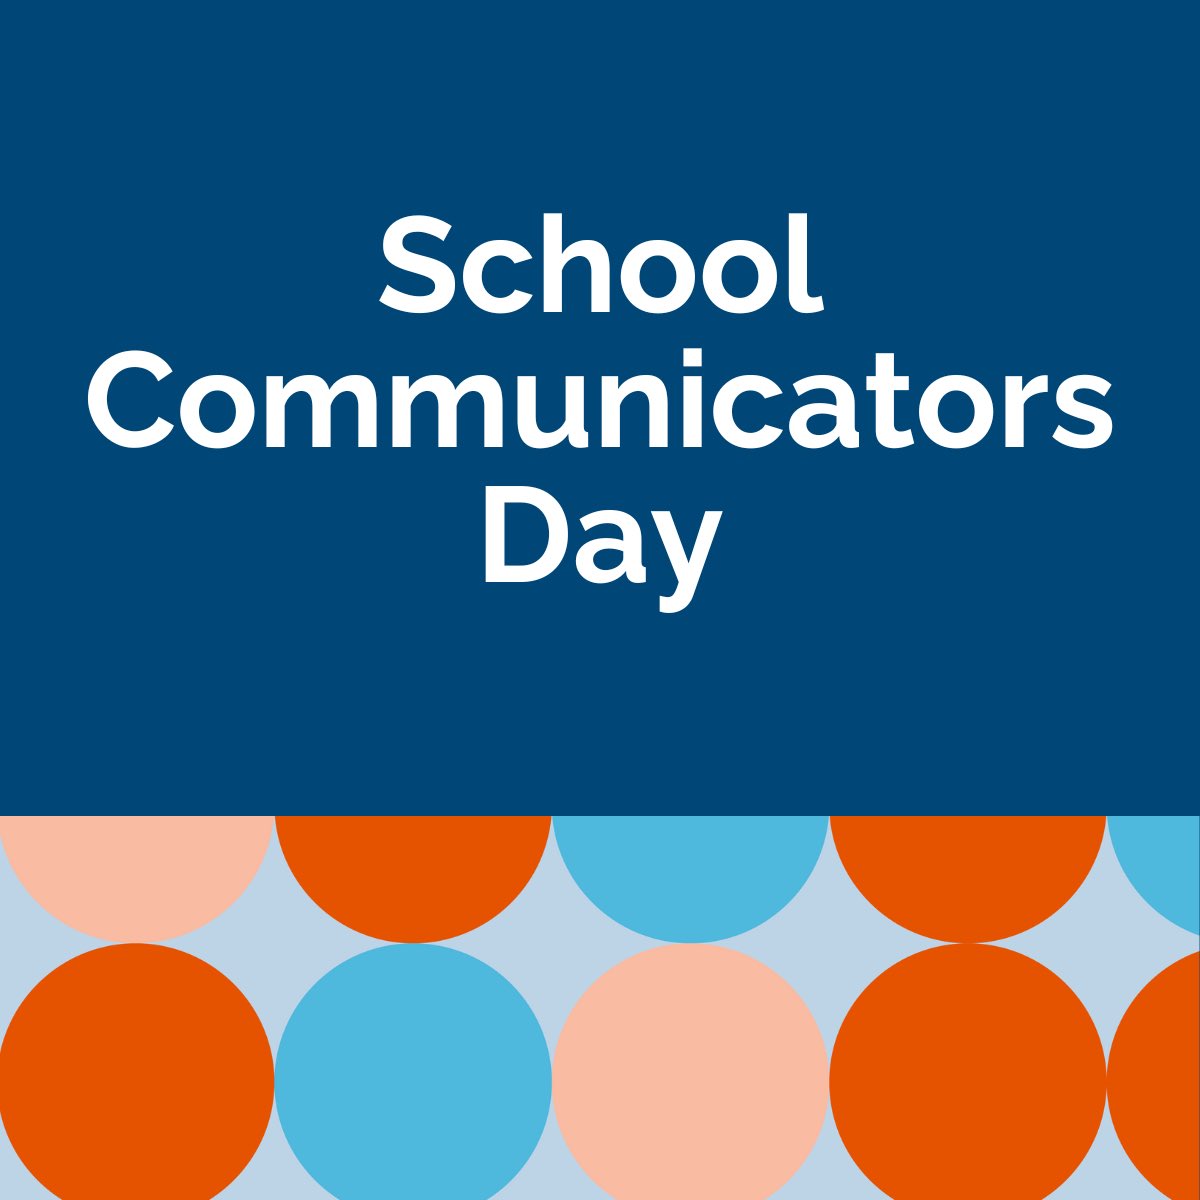 🎉 Happy School Communicators Day to my Chief of Staff @CotyKuschinsky! Coty, your dedication to sharing #OurStory throughout #SaginawISD is truly inspiring. Thank you for leading, connecting, informing, and making a positive impact in education every day. #ScoolCommunicatorsDay